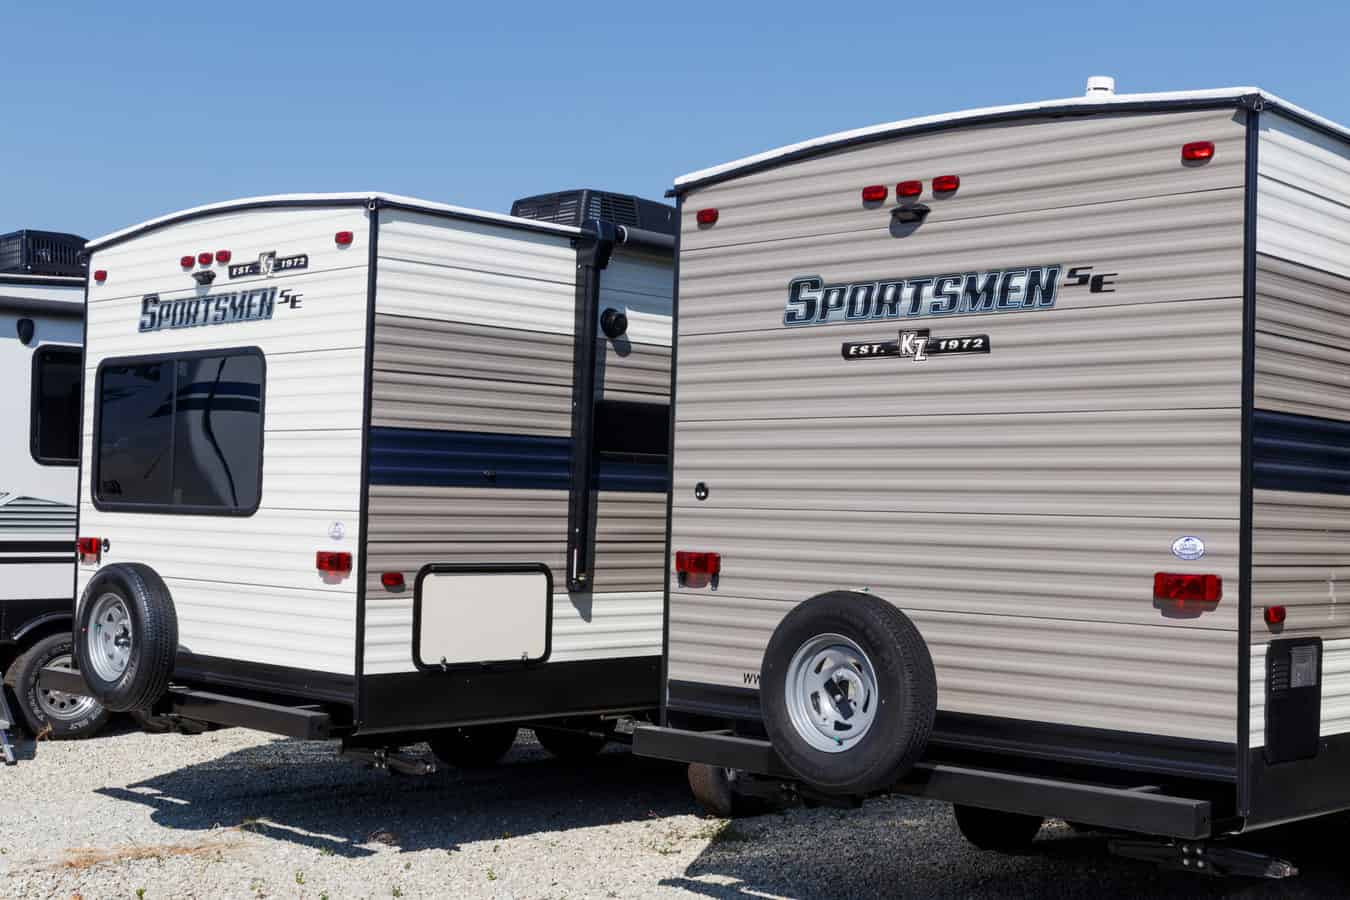 RVs at dealership with no camper price listed